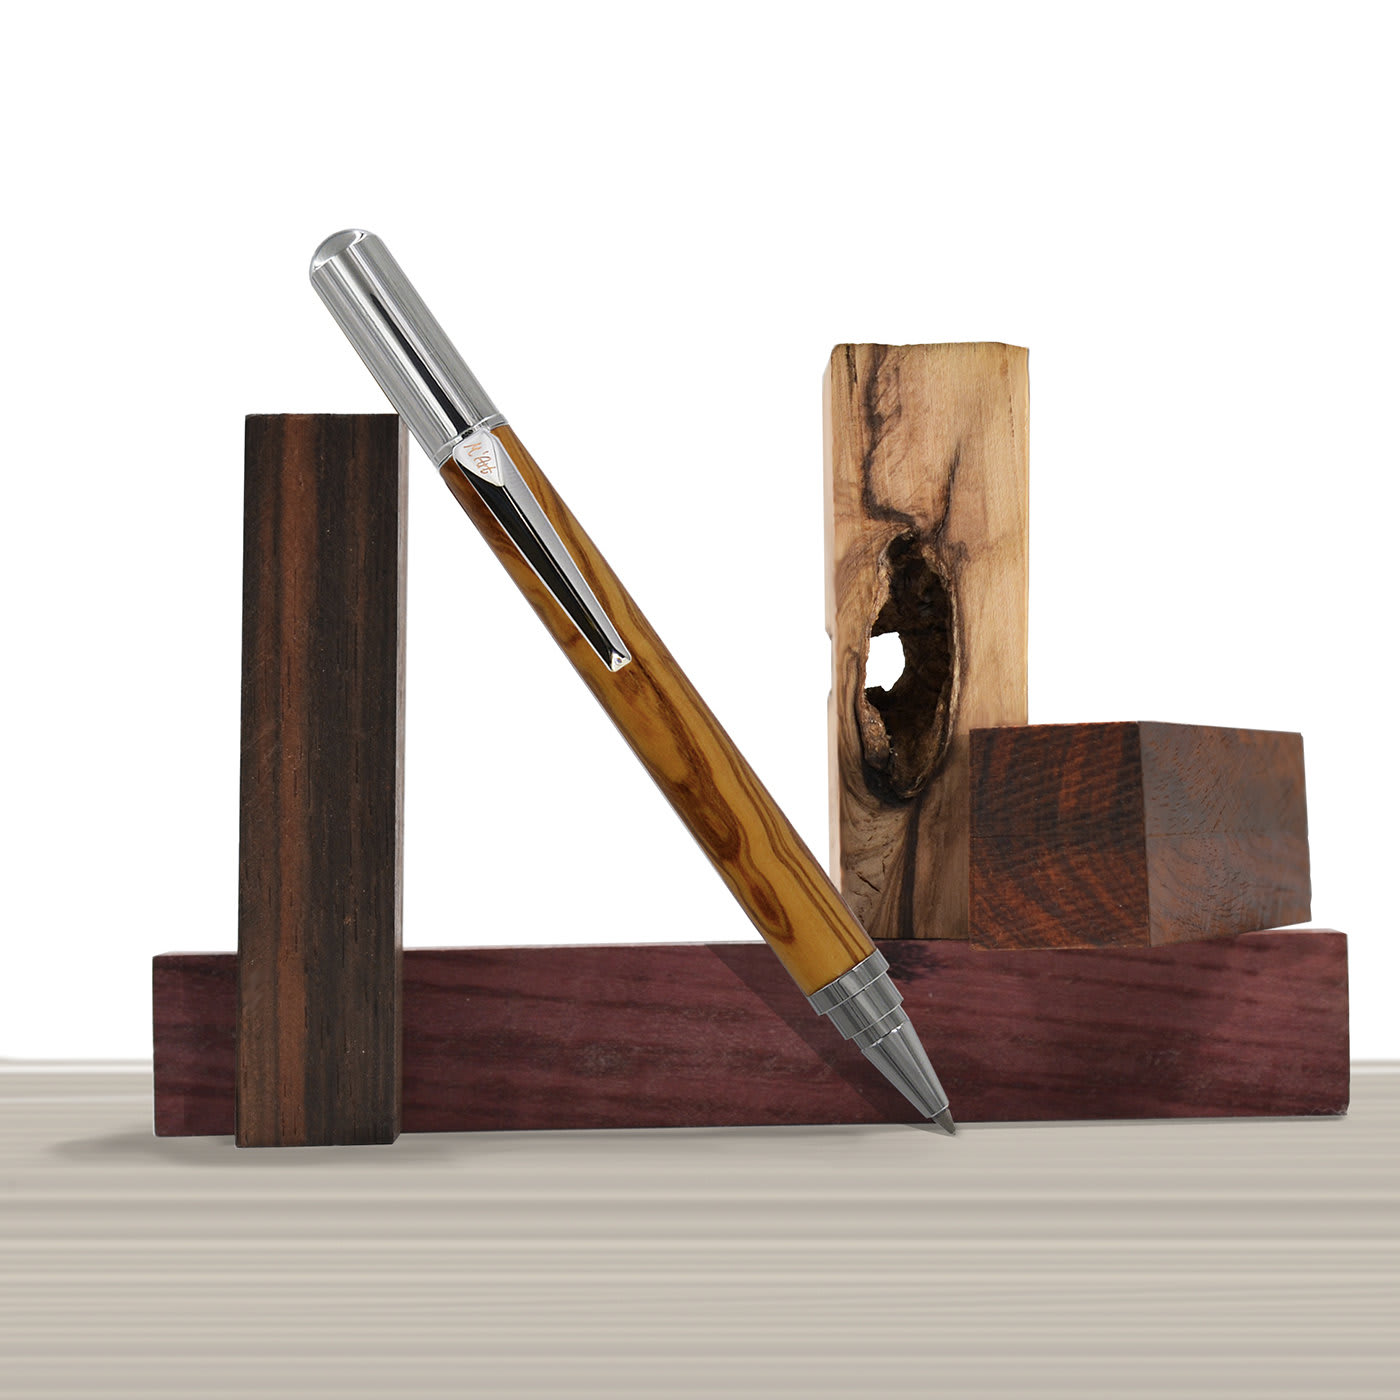 Matera Roller in Olive Wood - M'Art